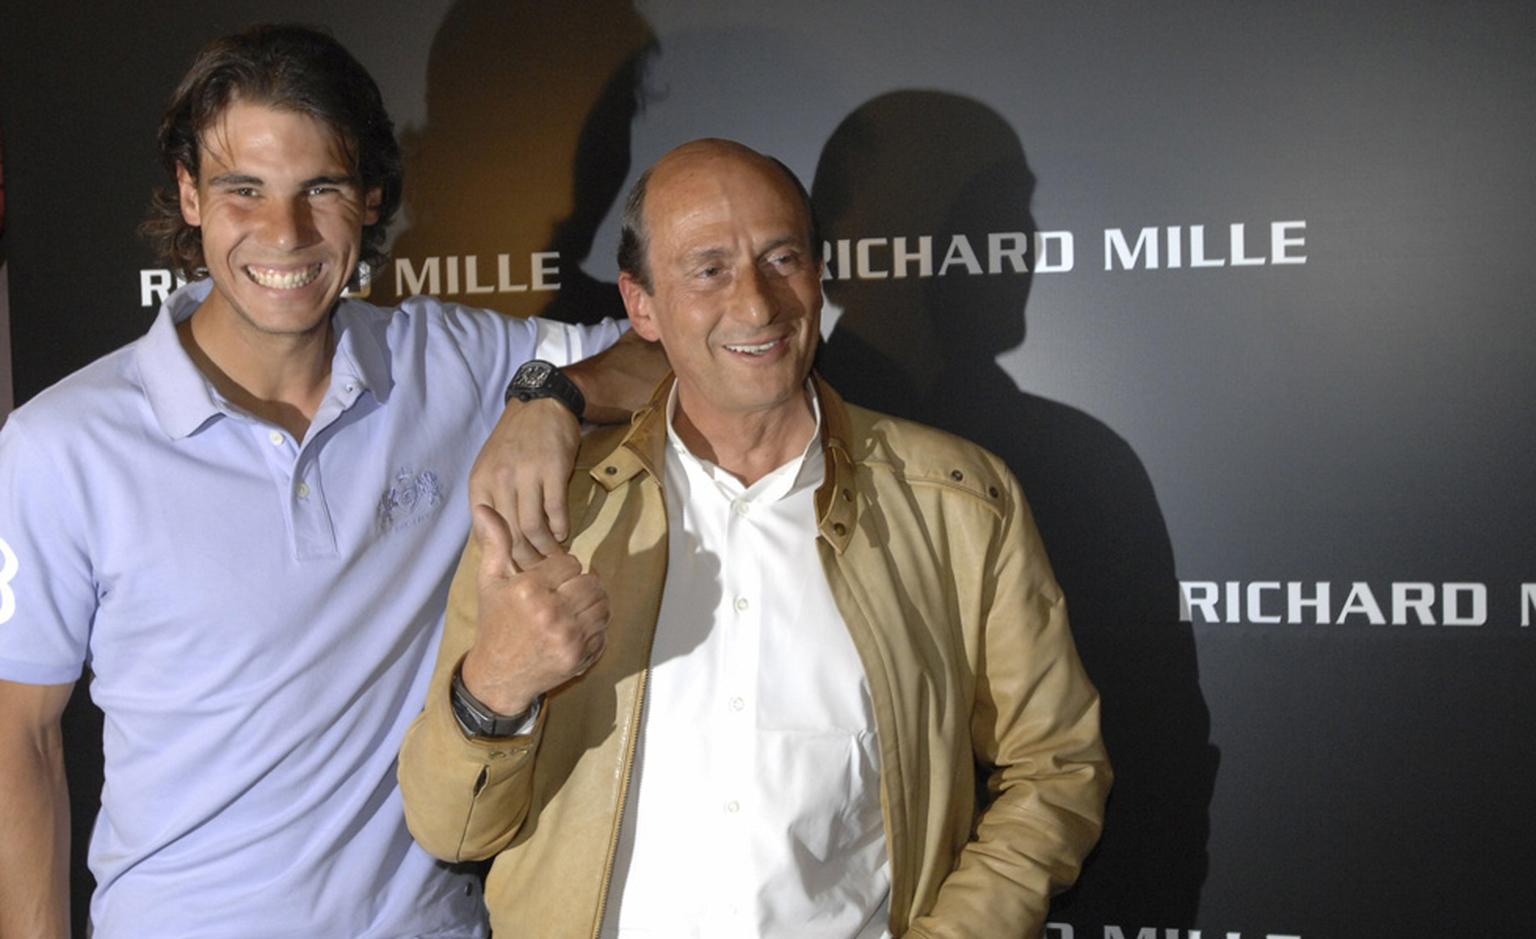 Rafael Nadal with Richard Mille who has provided him with the big, black watch that accompanies Nadal on all his high-profile tennis tournaments.